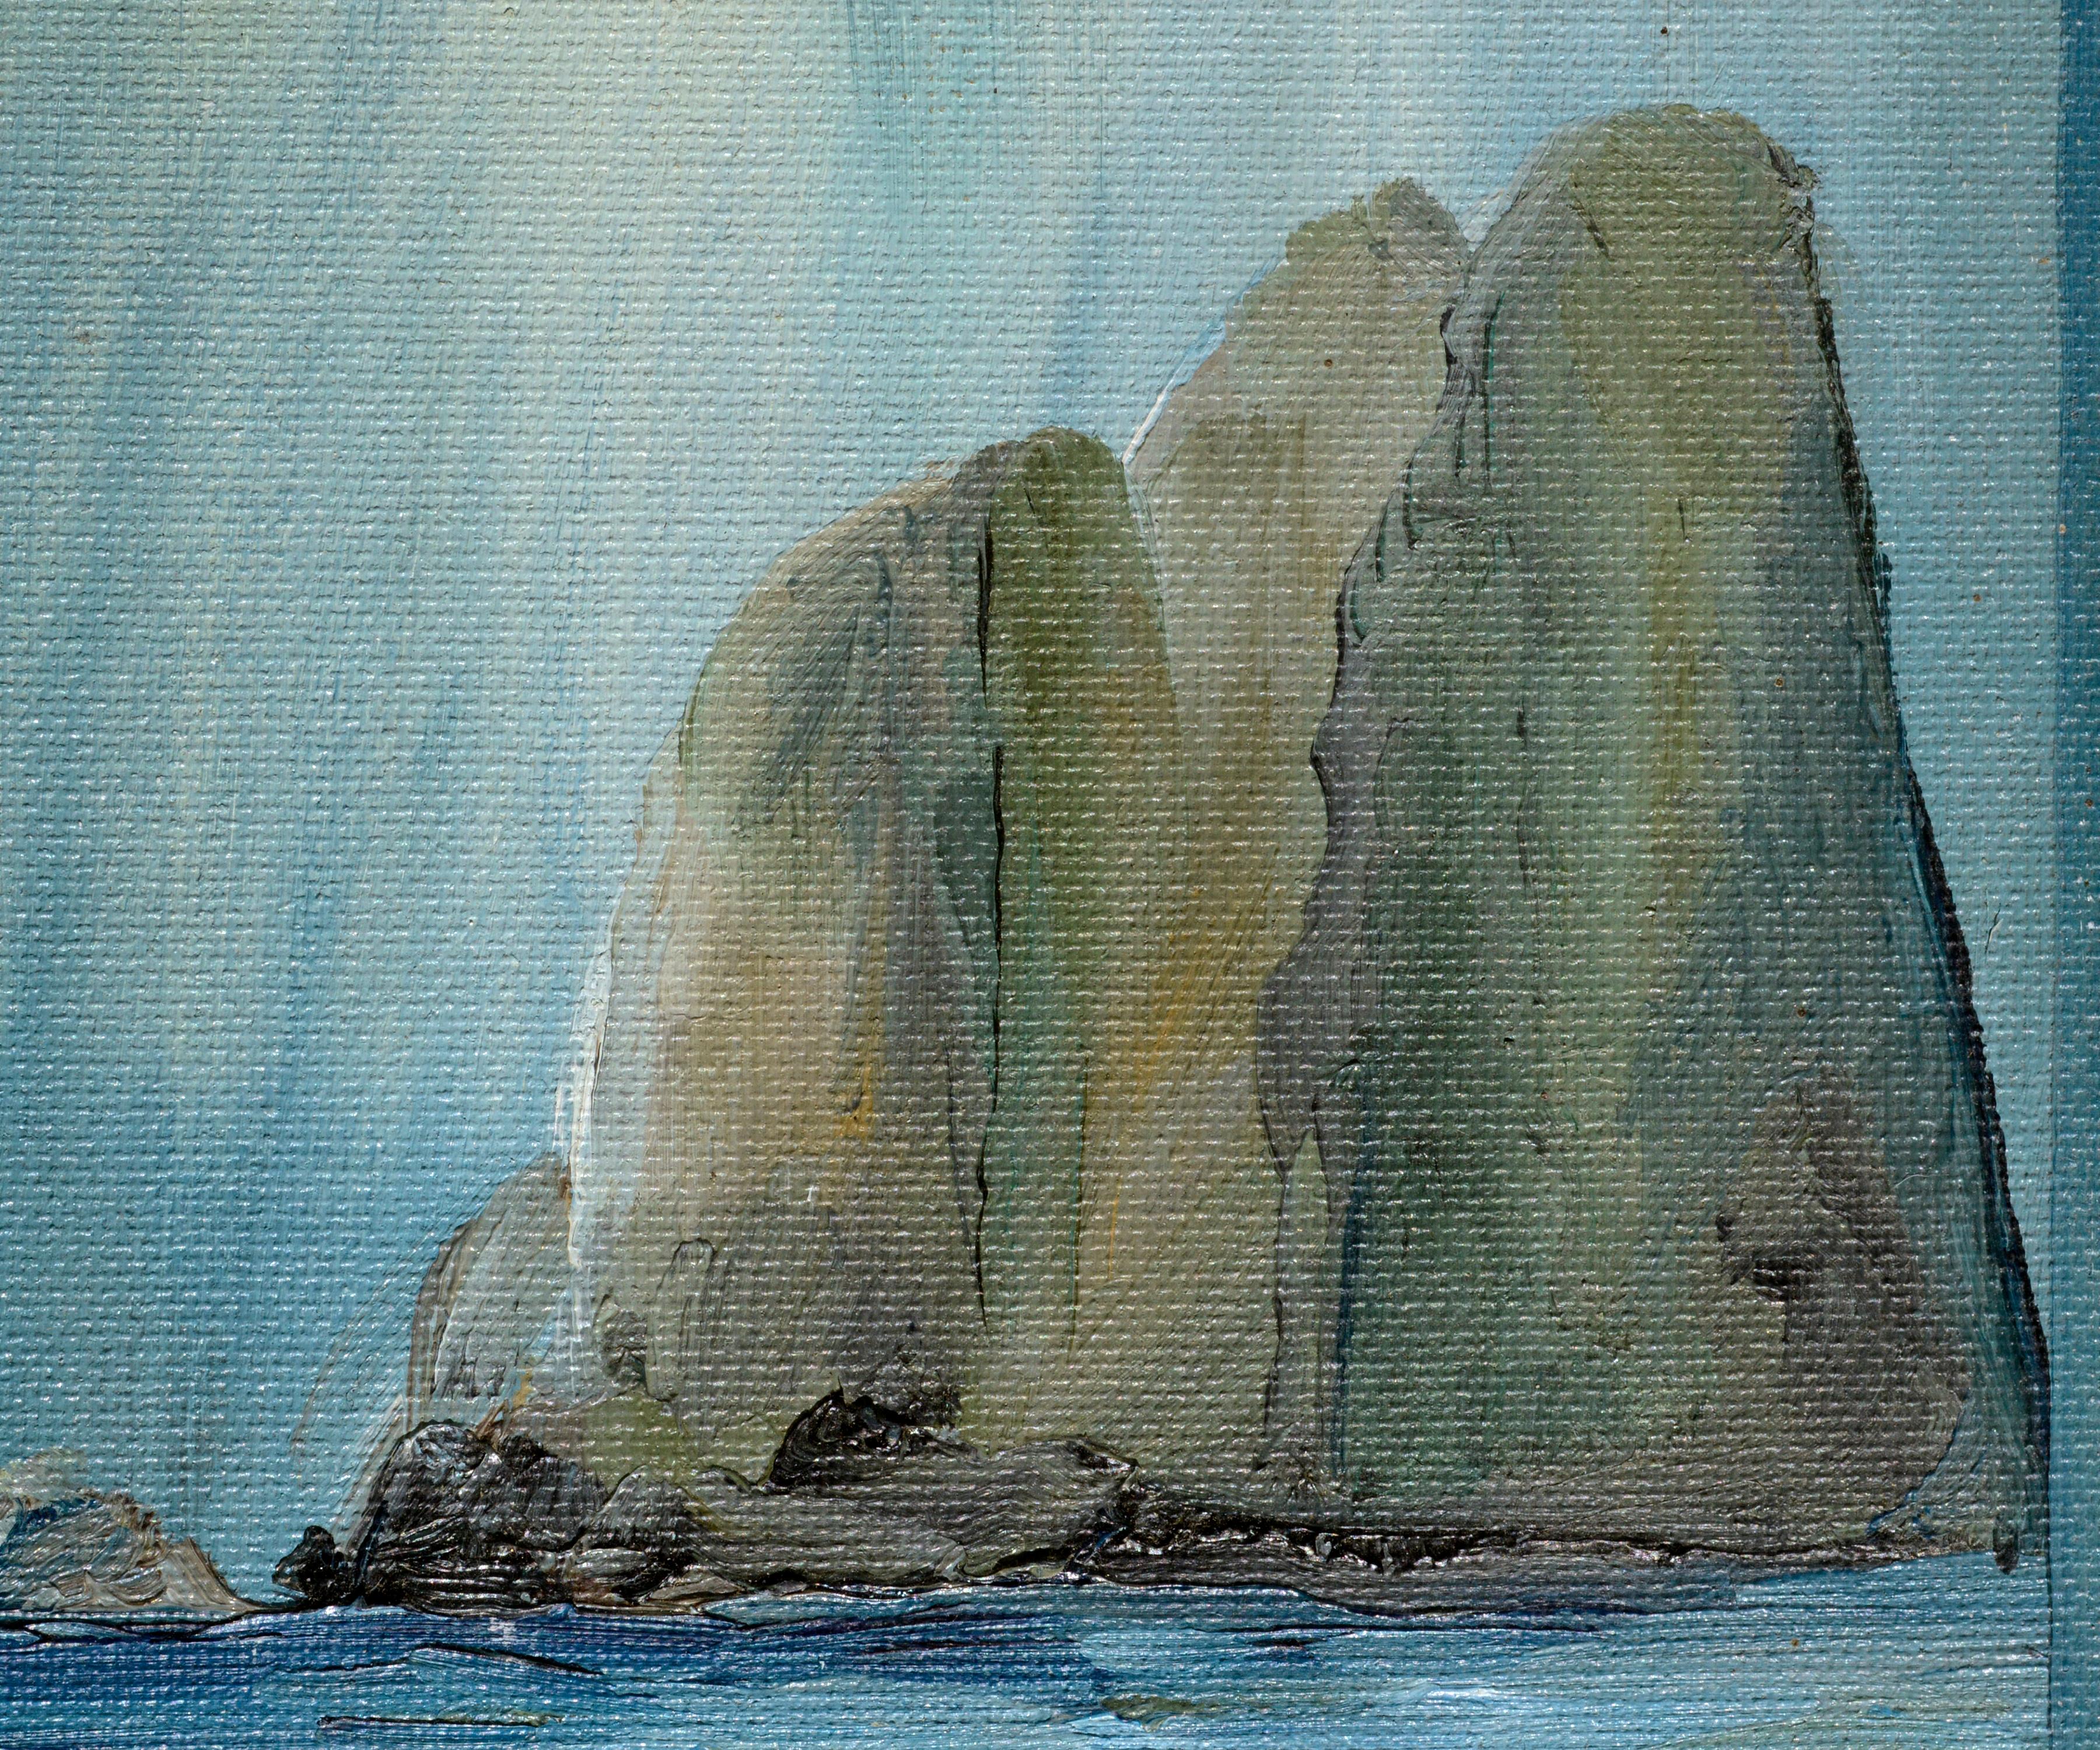 Three Large Cliffs in the Sea, Miniature Contemporary Coastal Seascape - American Impressionist Painting by Kathleen Murray